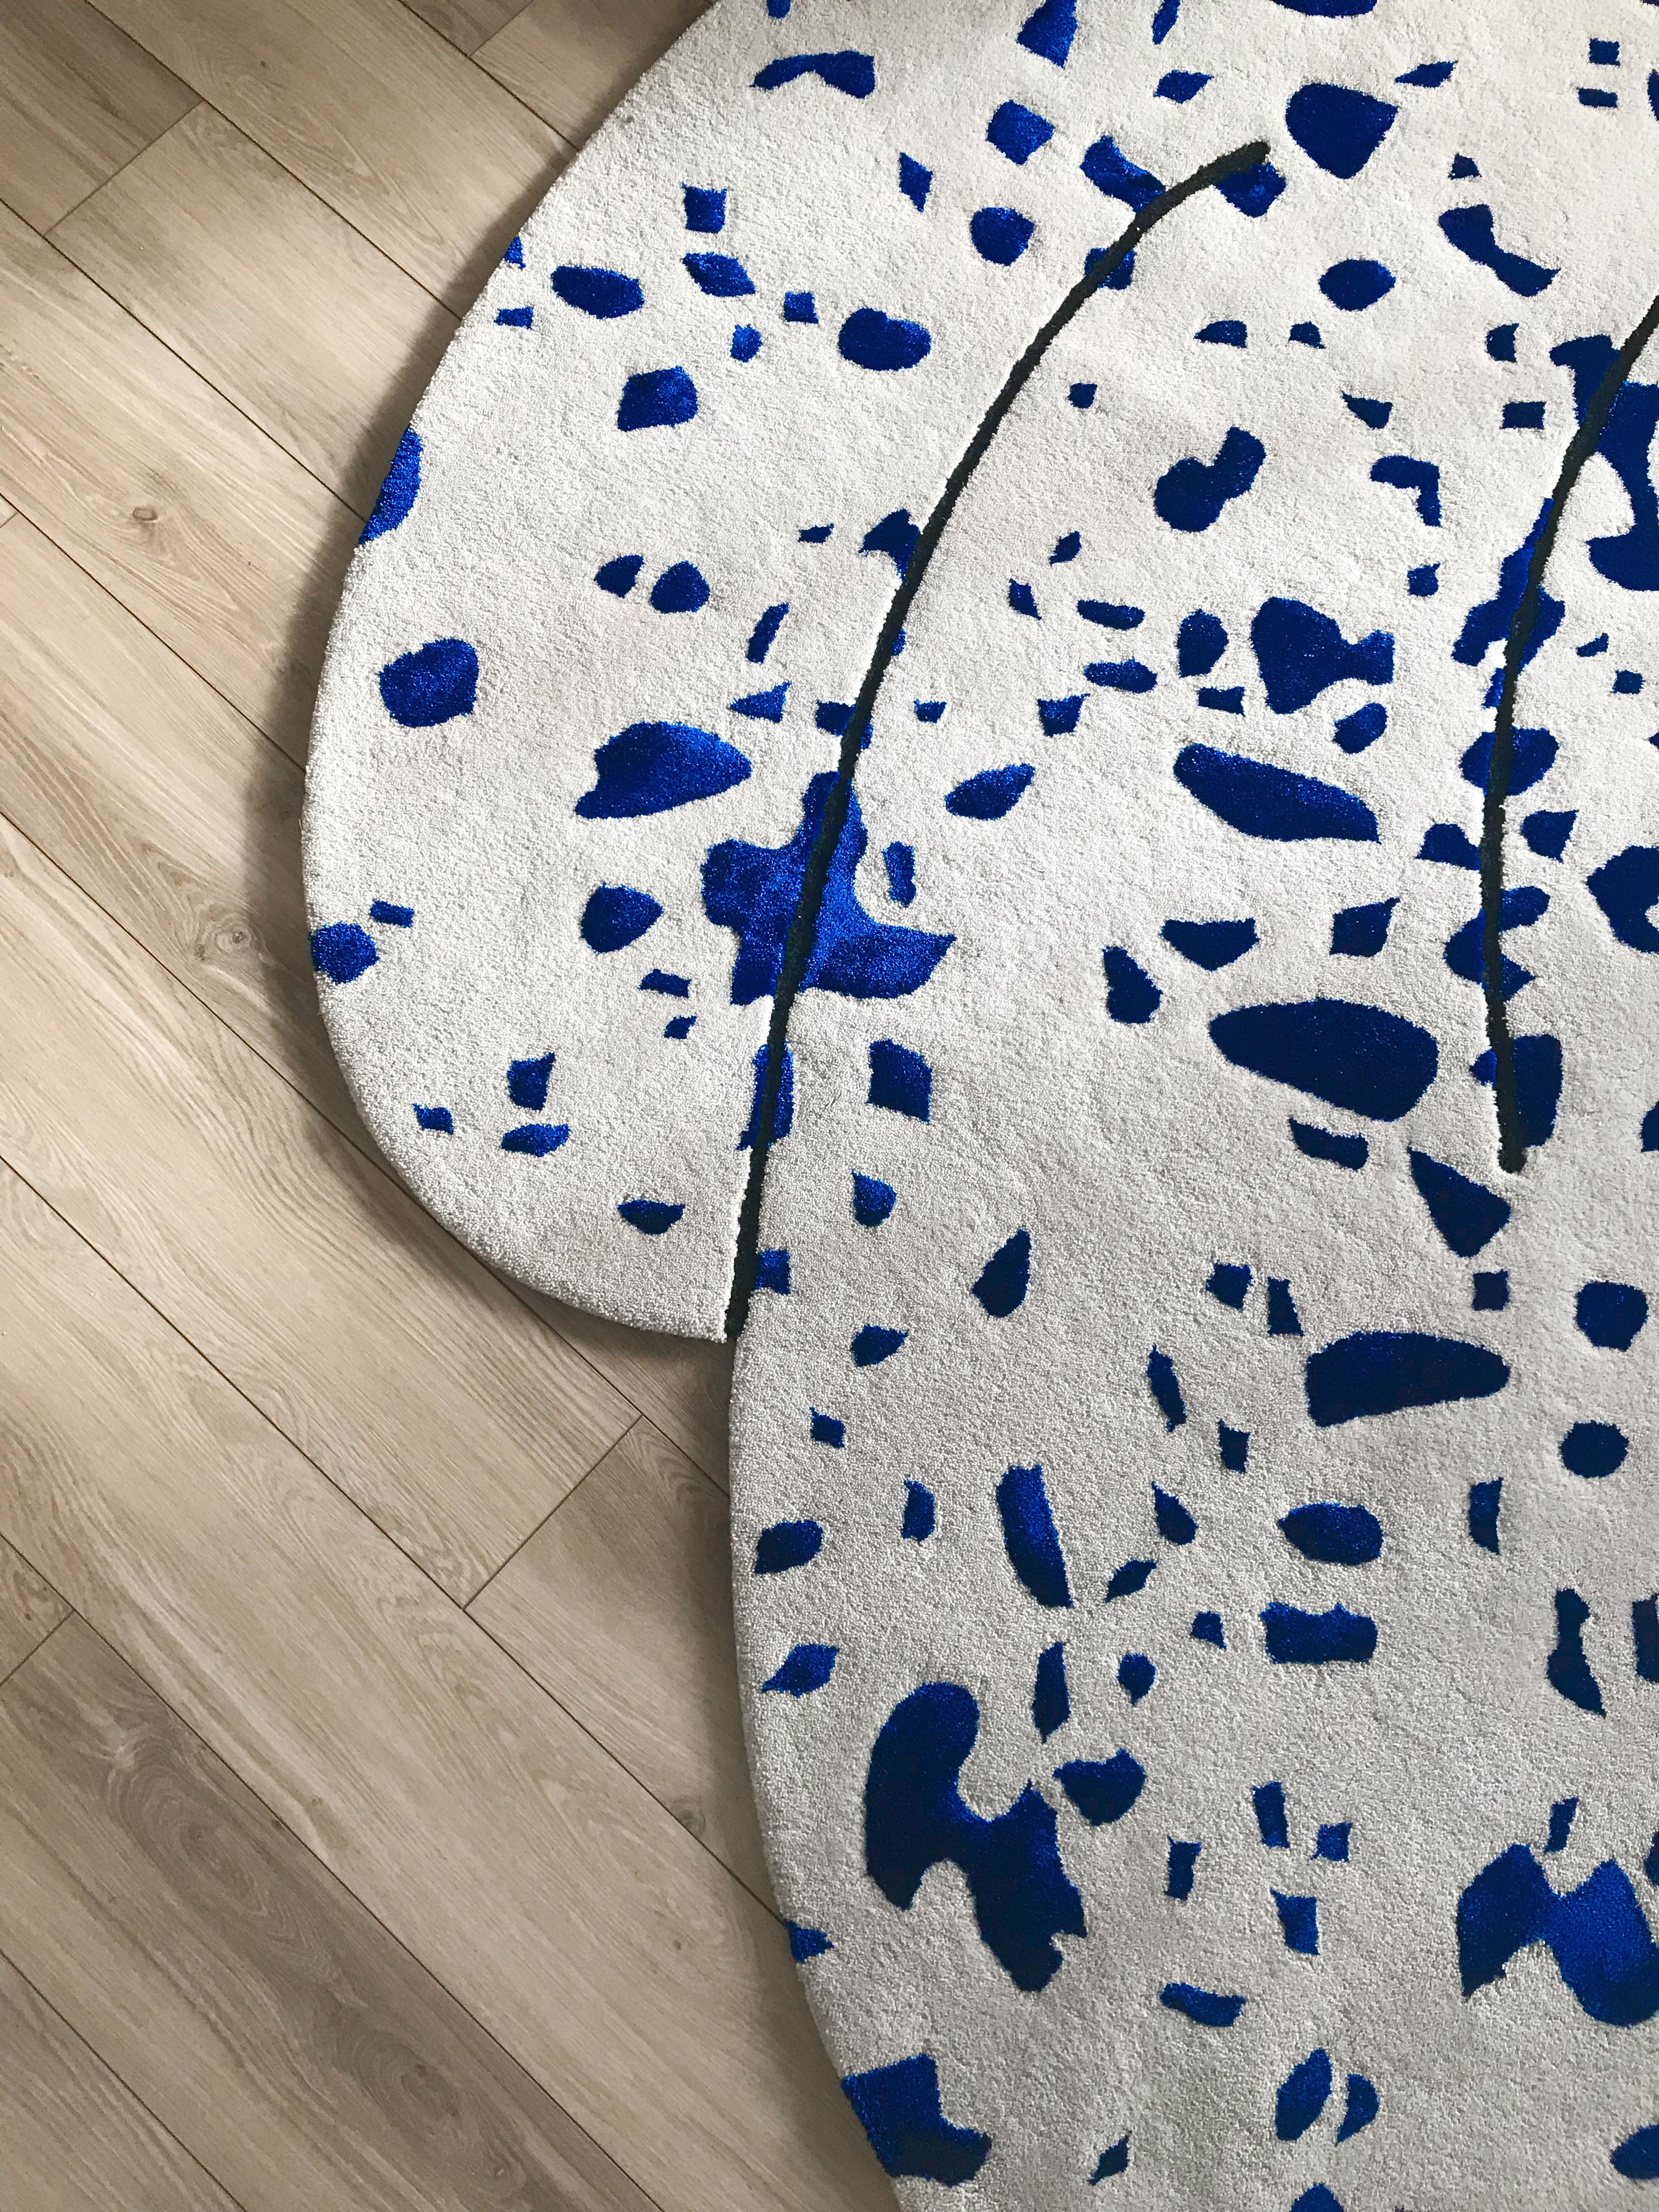 Contemporary Okej - Speckled Squiggle Rug 7 x 10 FT For Sale